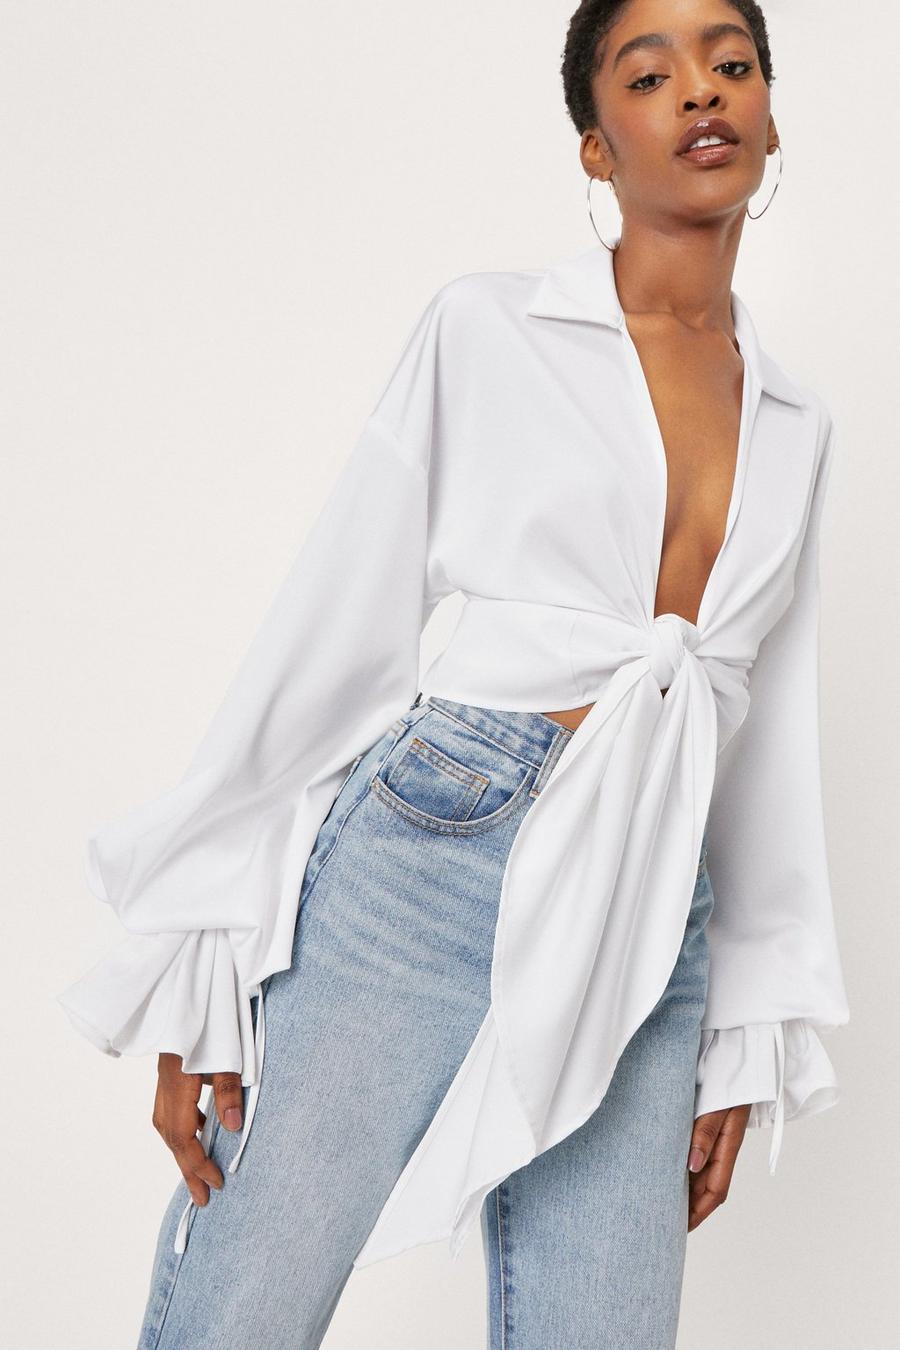 Going Out Tops | Party & Dressy Tops | Nasty Gal